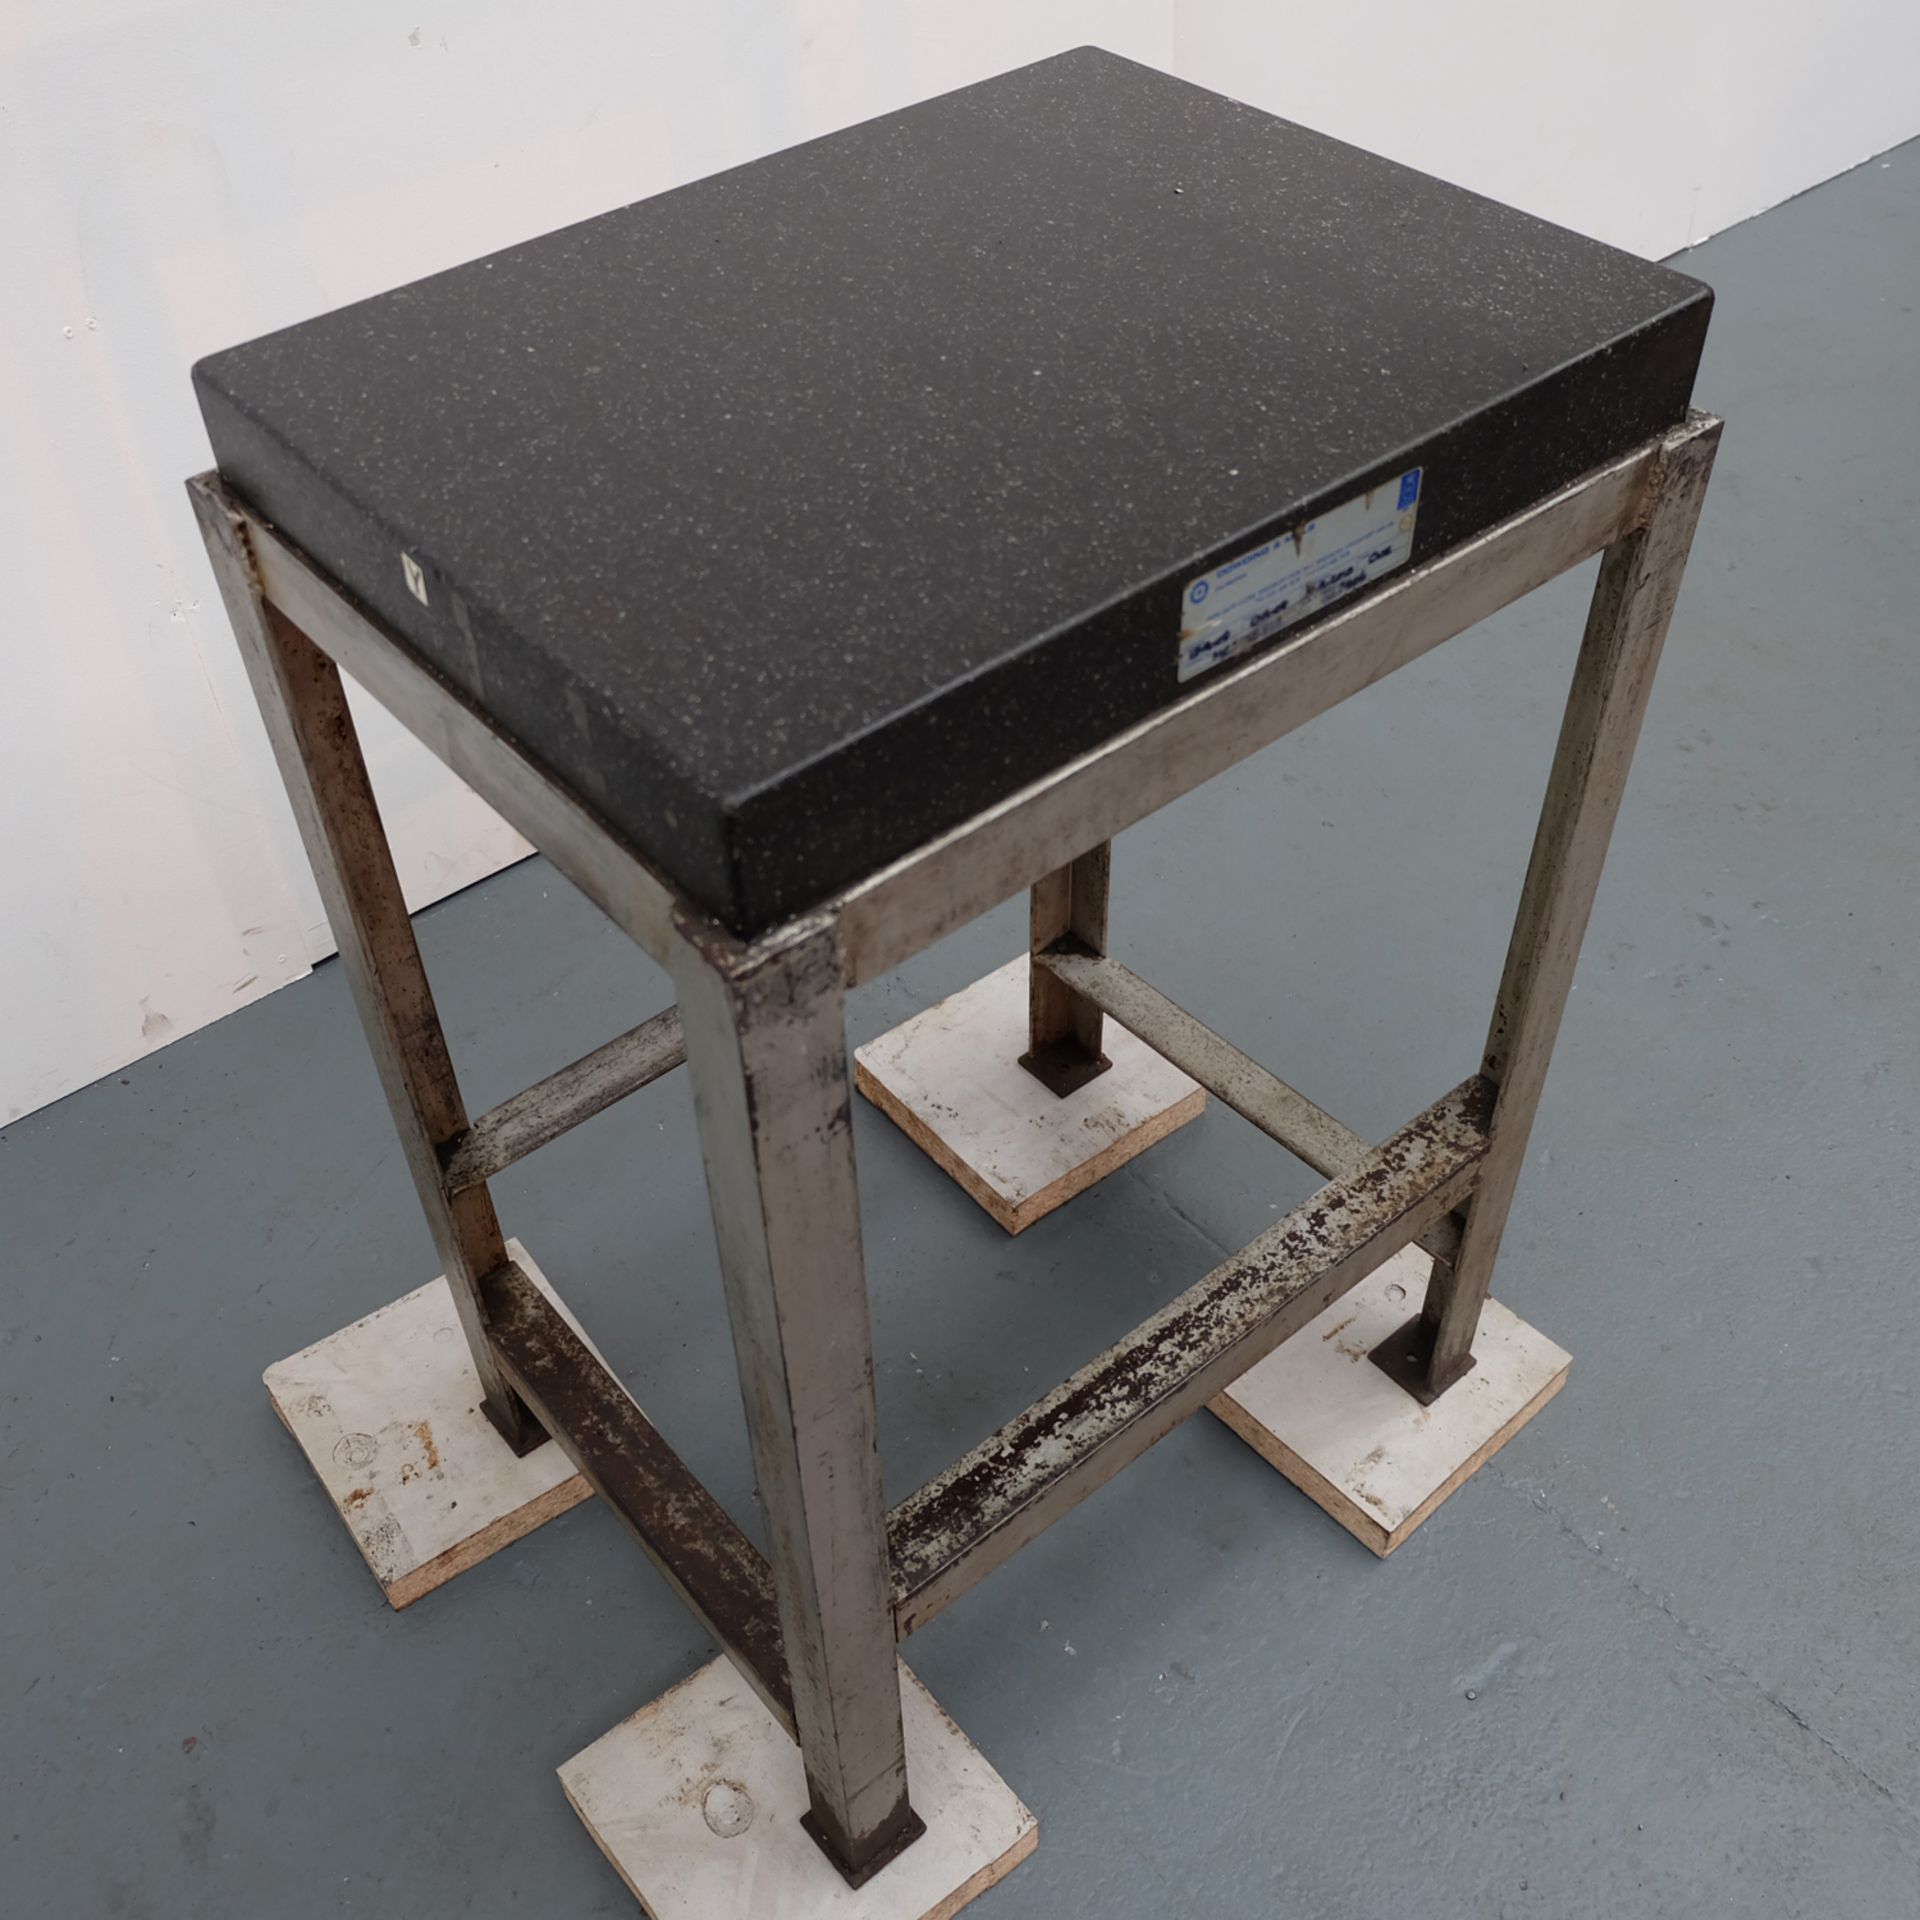 Granite Surface Plate on Steel Stand. Approx 600mm x 460mm x 915mm Working Height. - Image 6 of 7